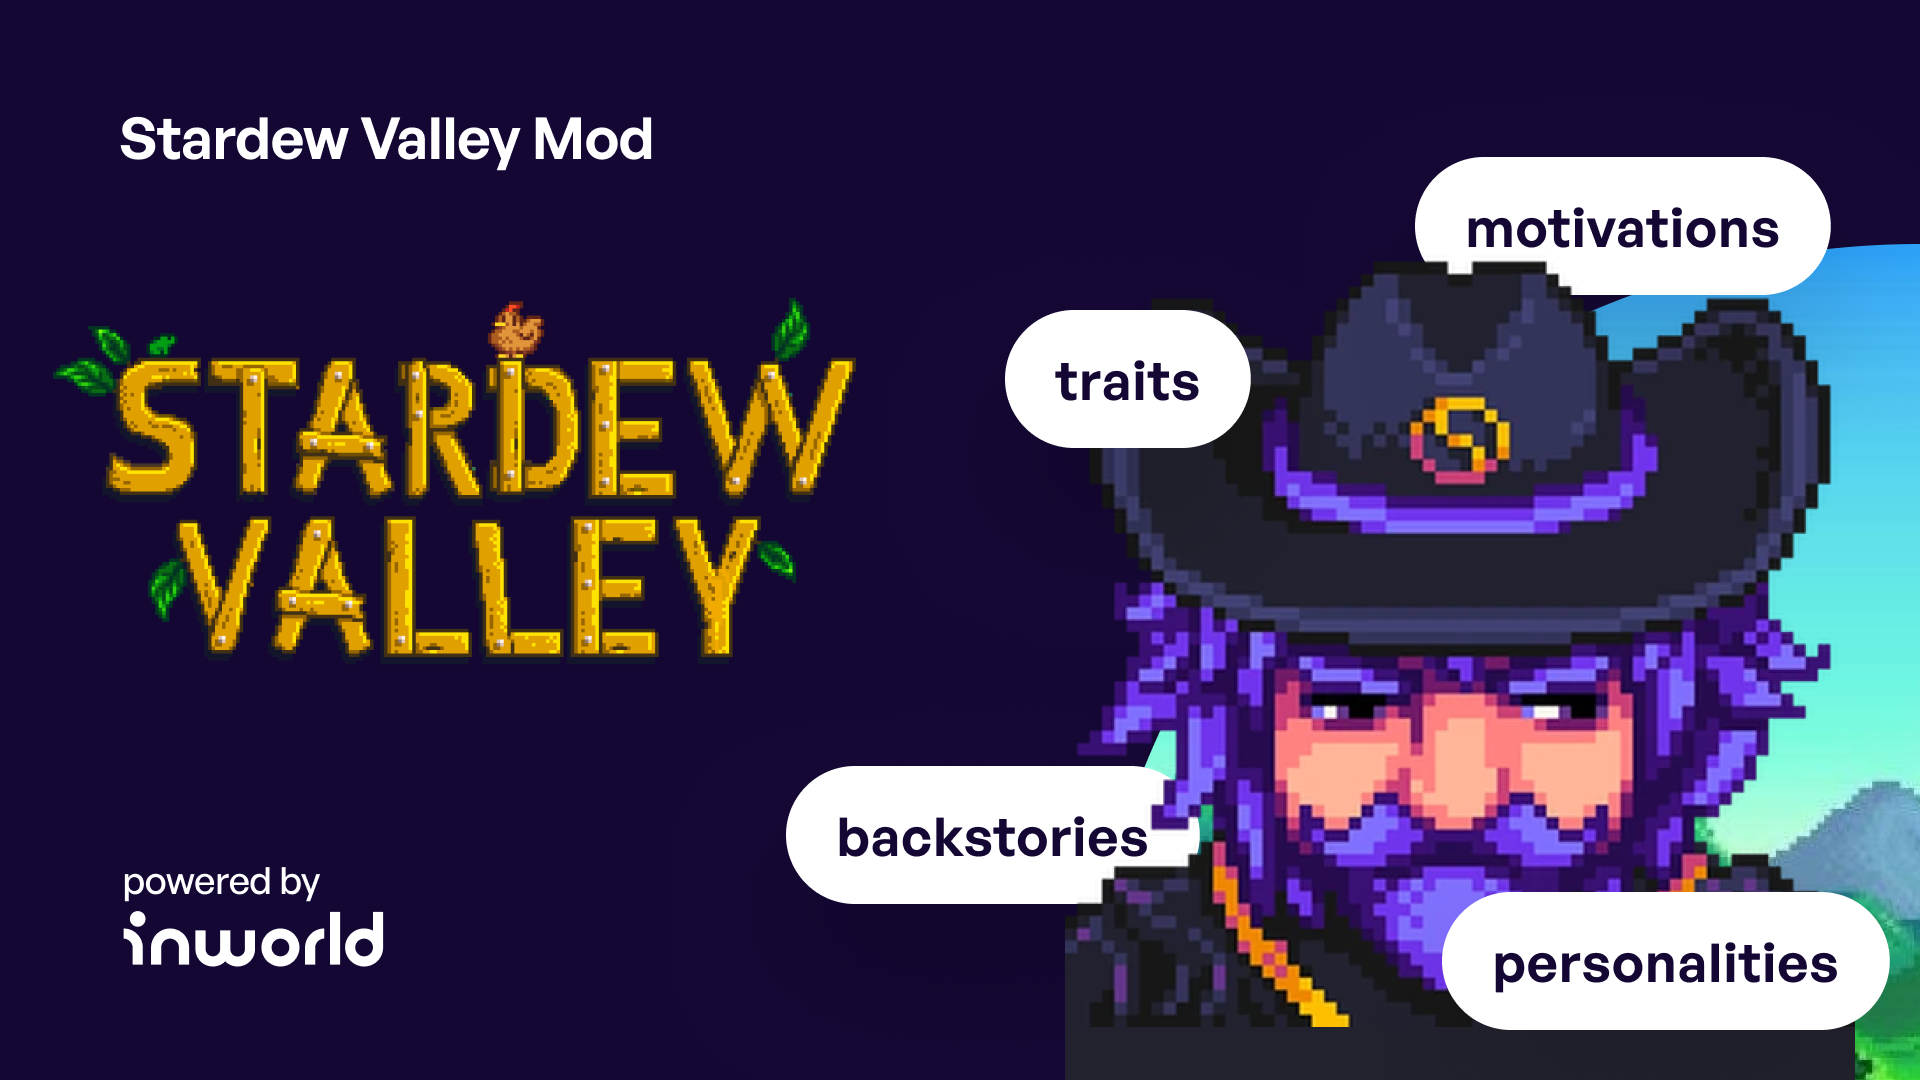 Stardew Valley Anime Mod: Features, Requirements, and More